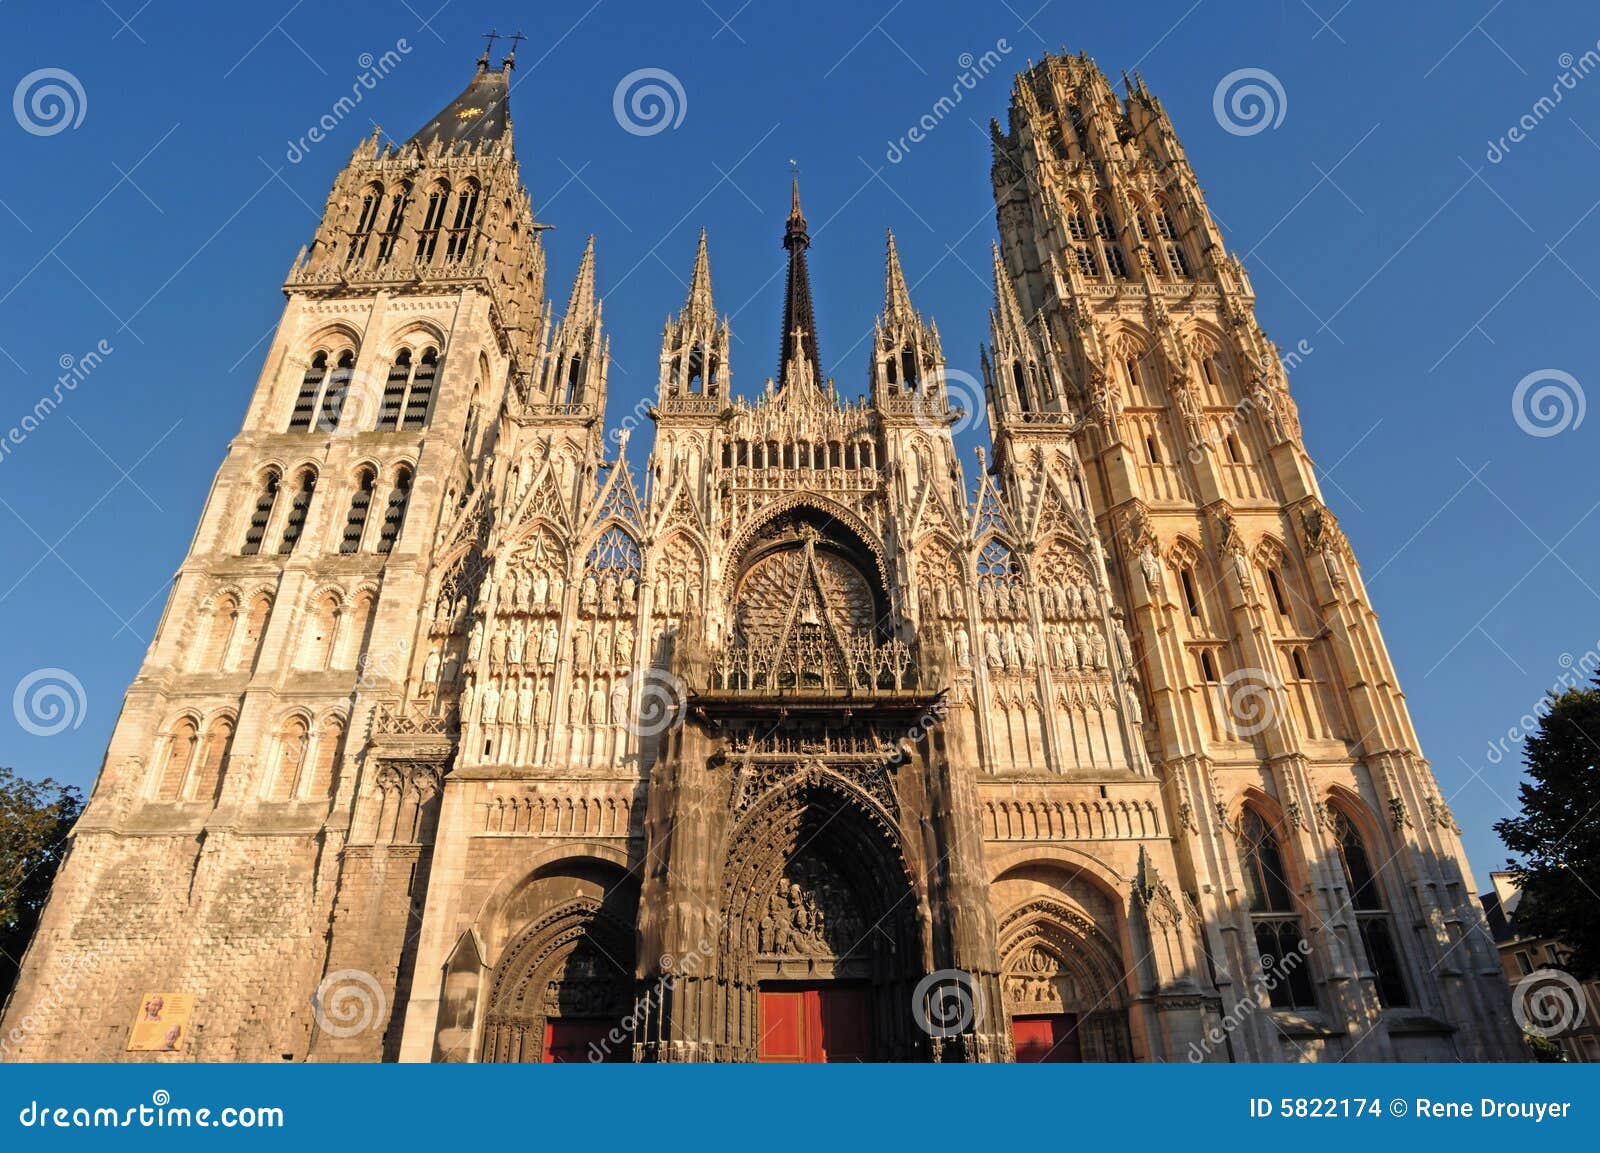 france rouen: the gothic cathedral of rouen